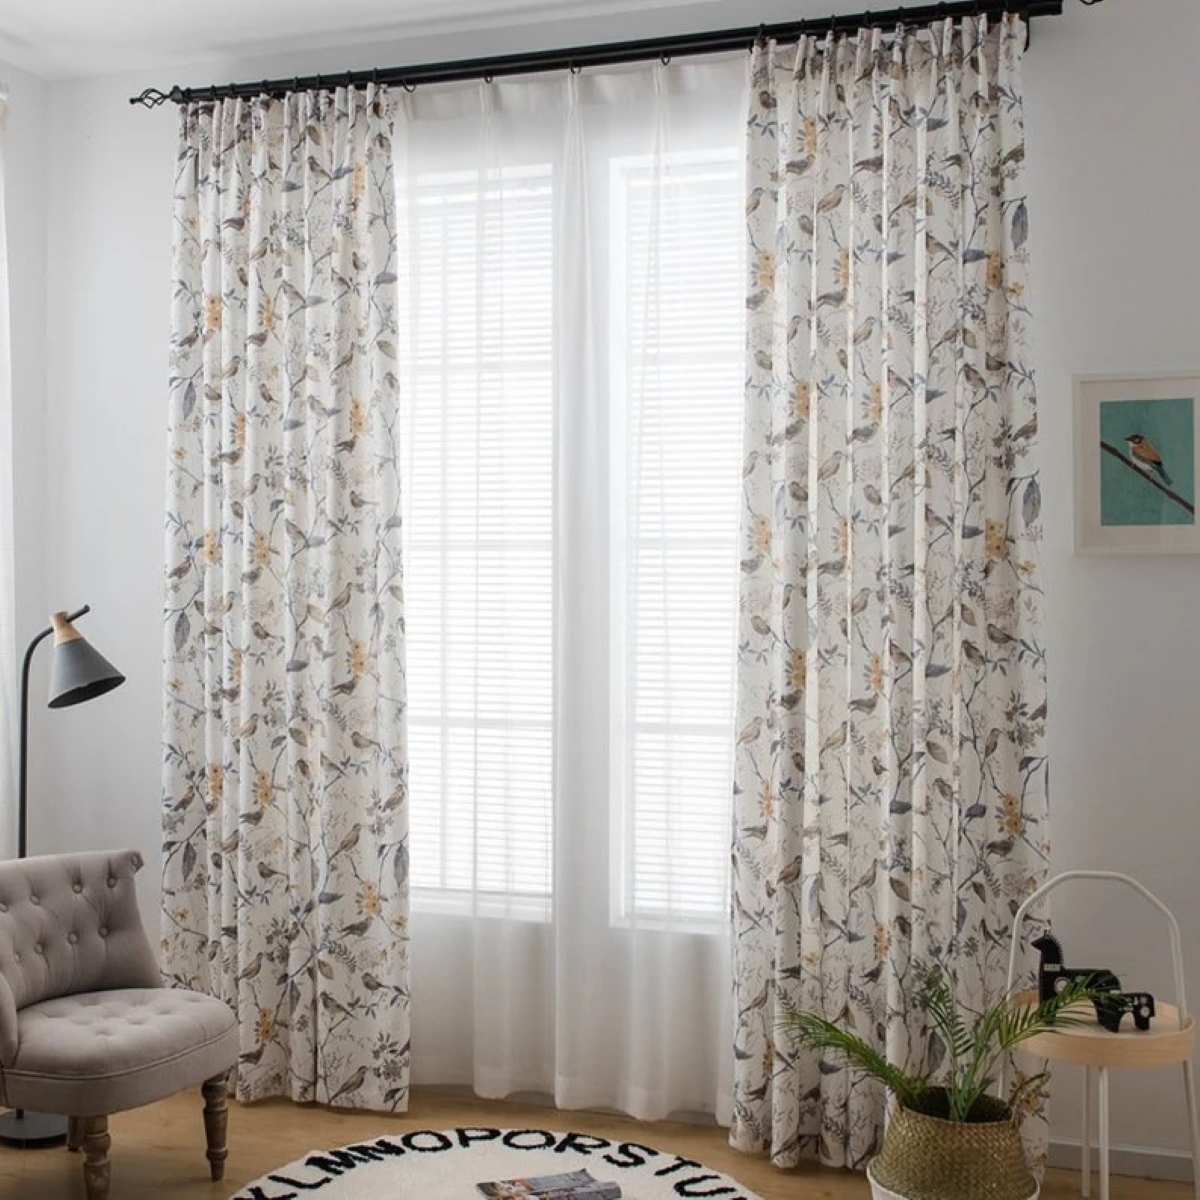 Bright window with curtains layered with print curtains